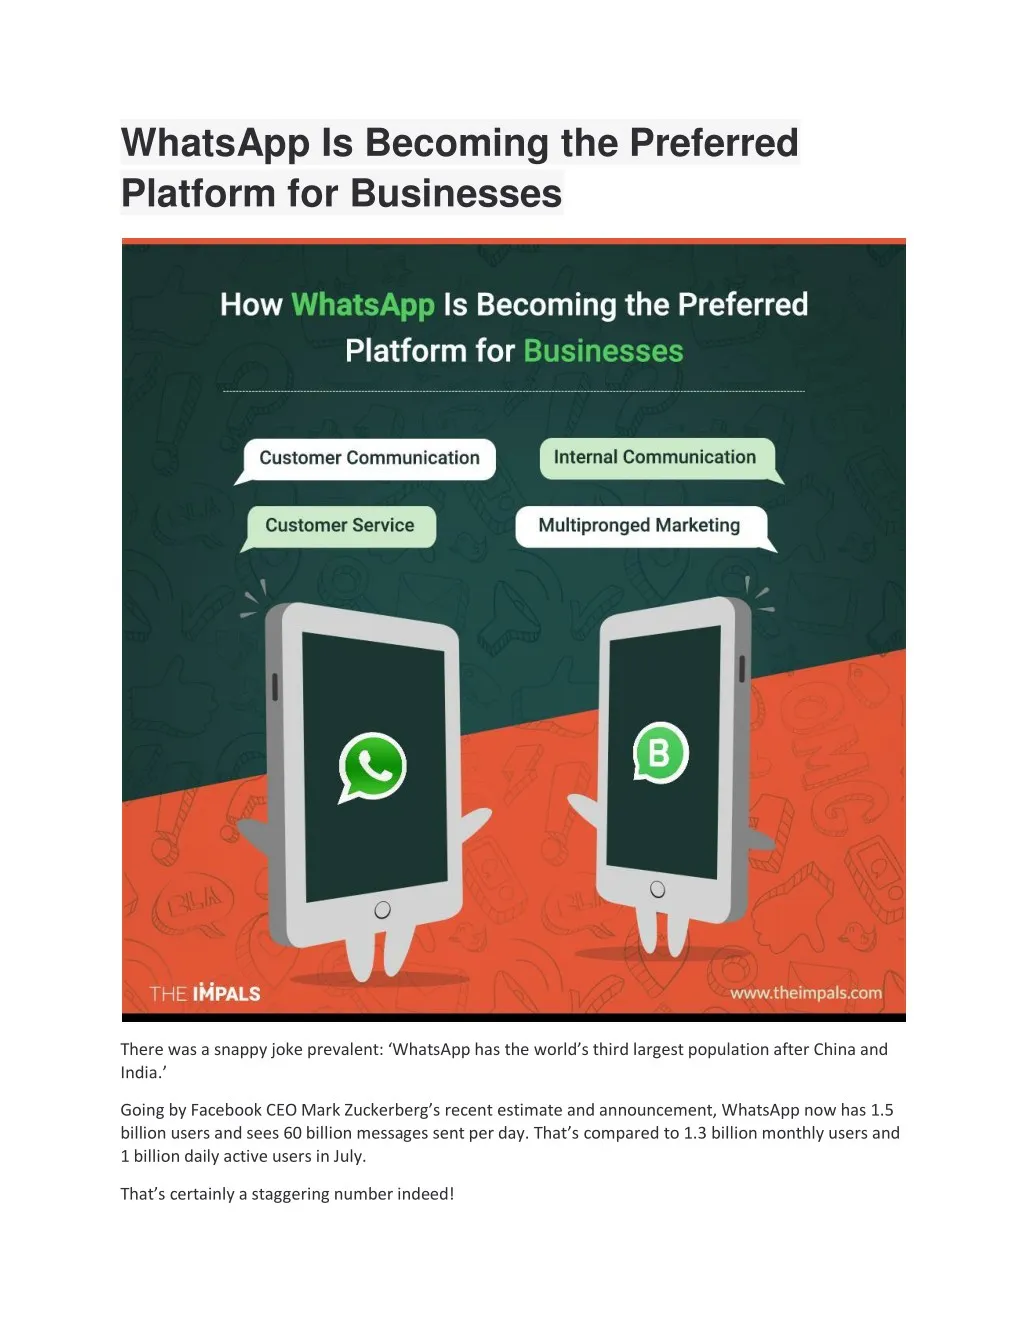 whatsapp is becoming the preferred platform